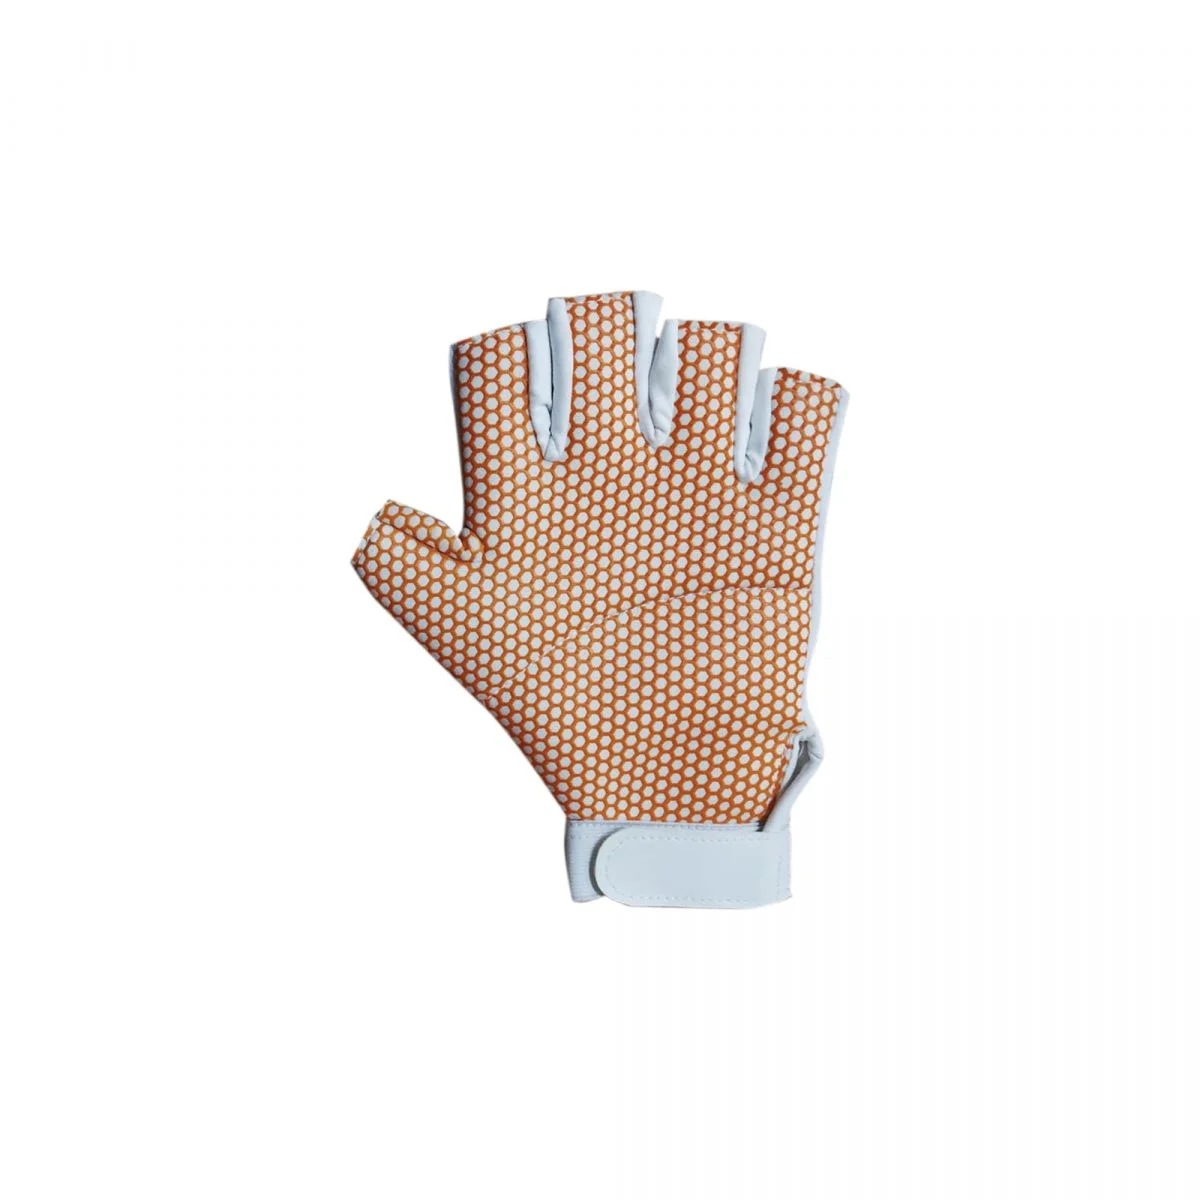 SS Adult Cricket Catching/Fielding Gloves